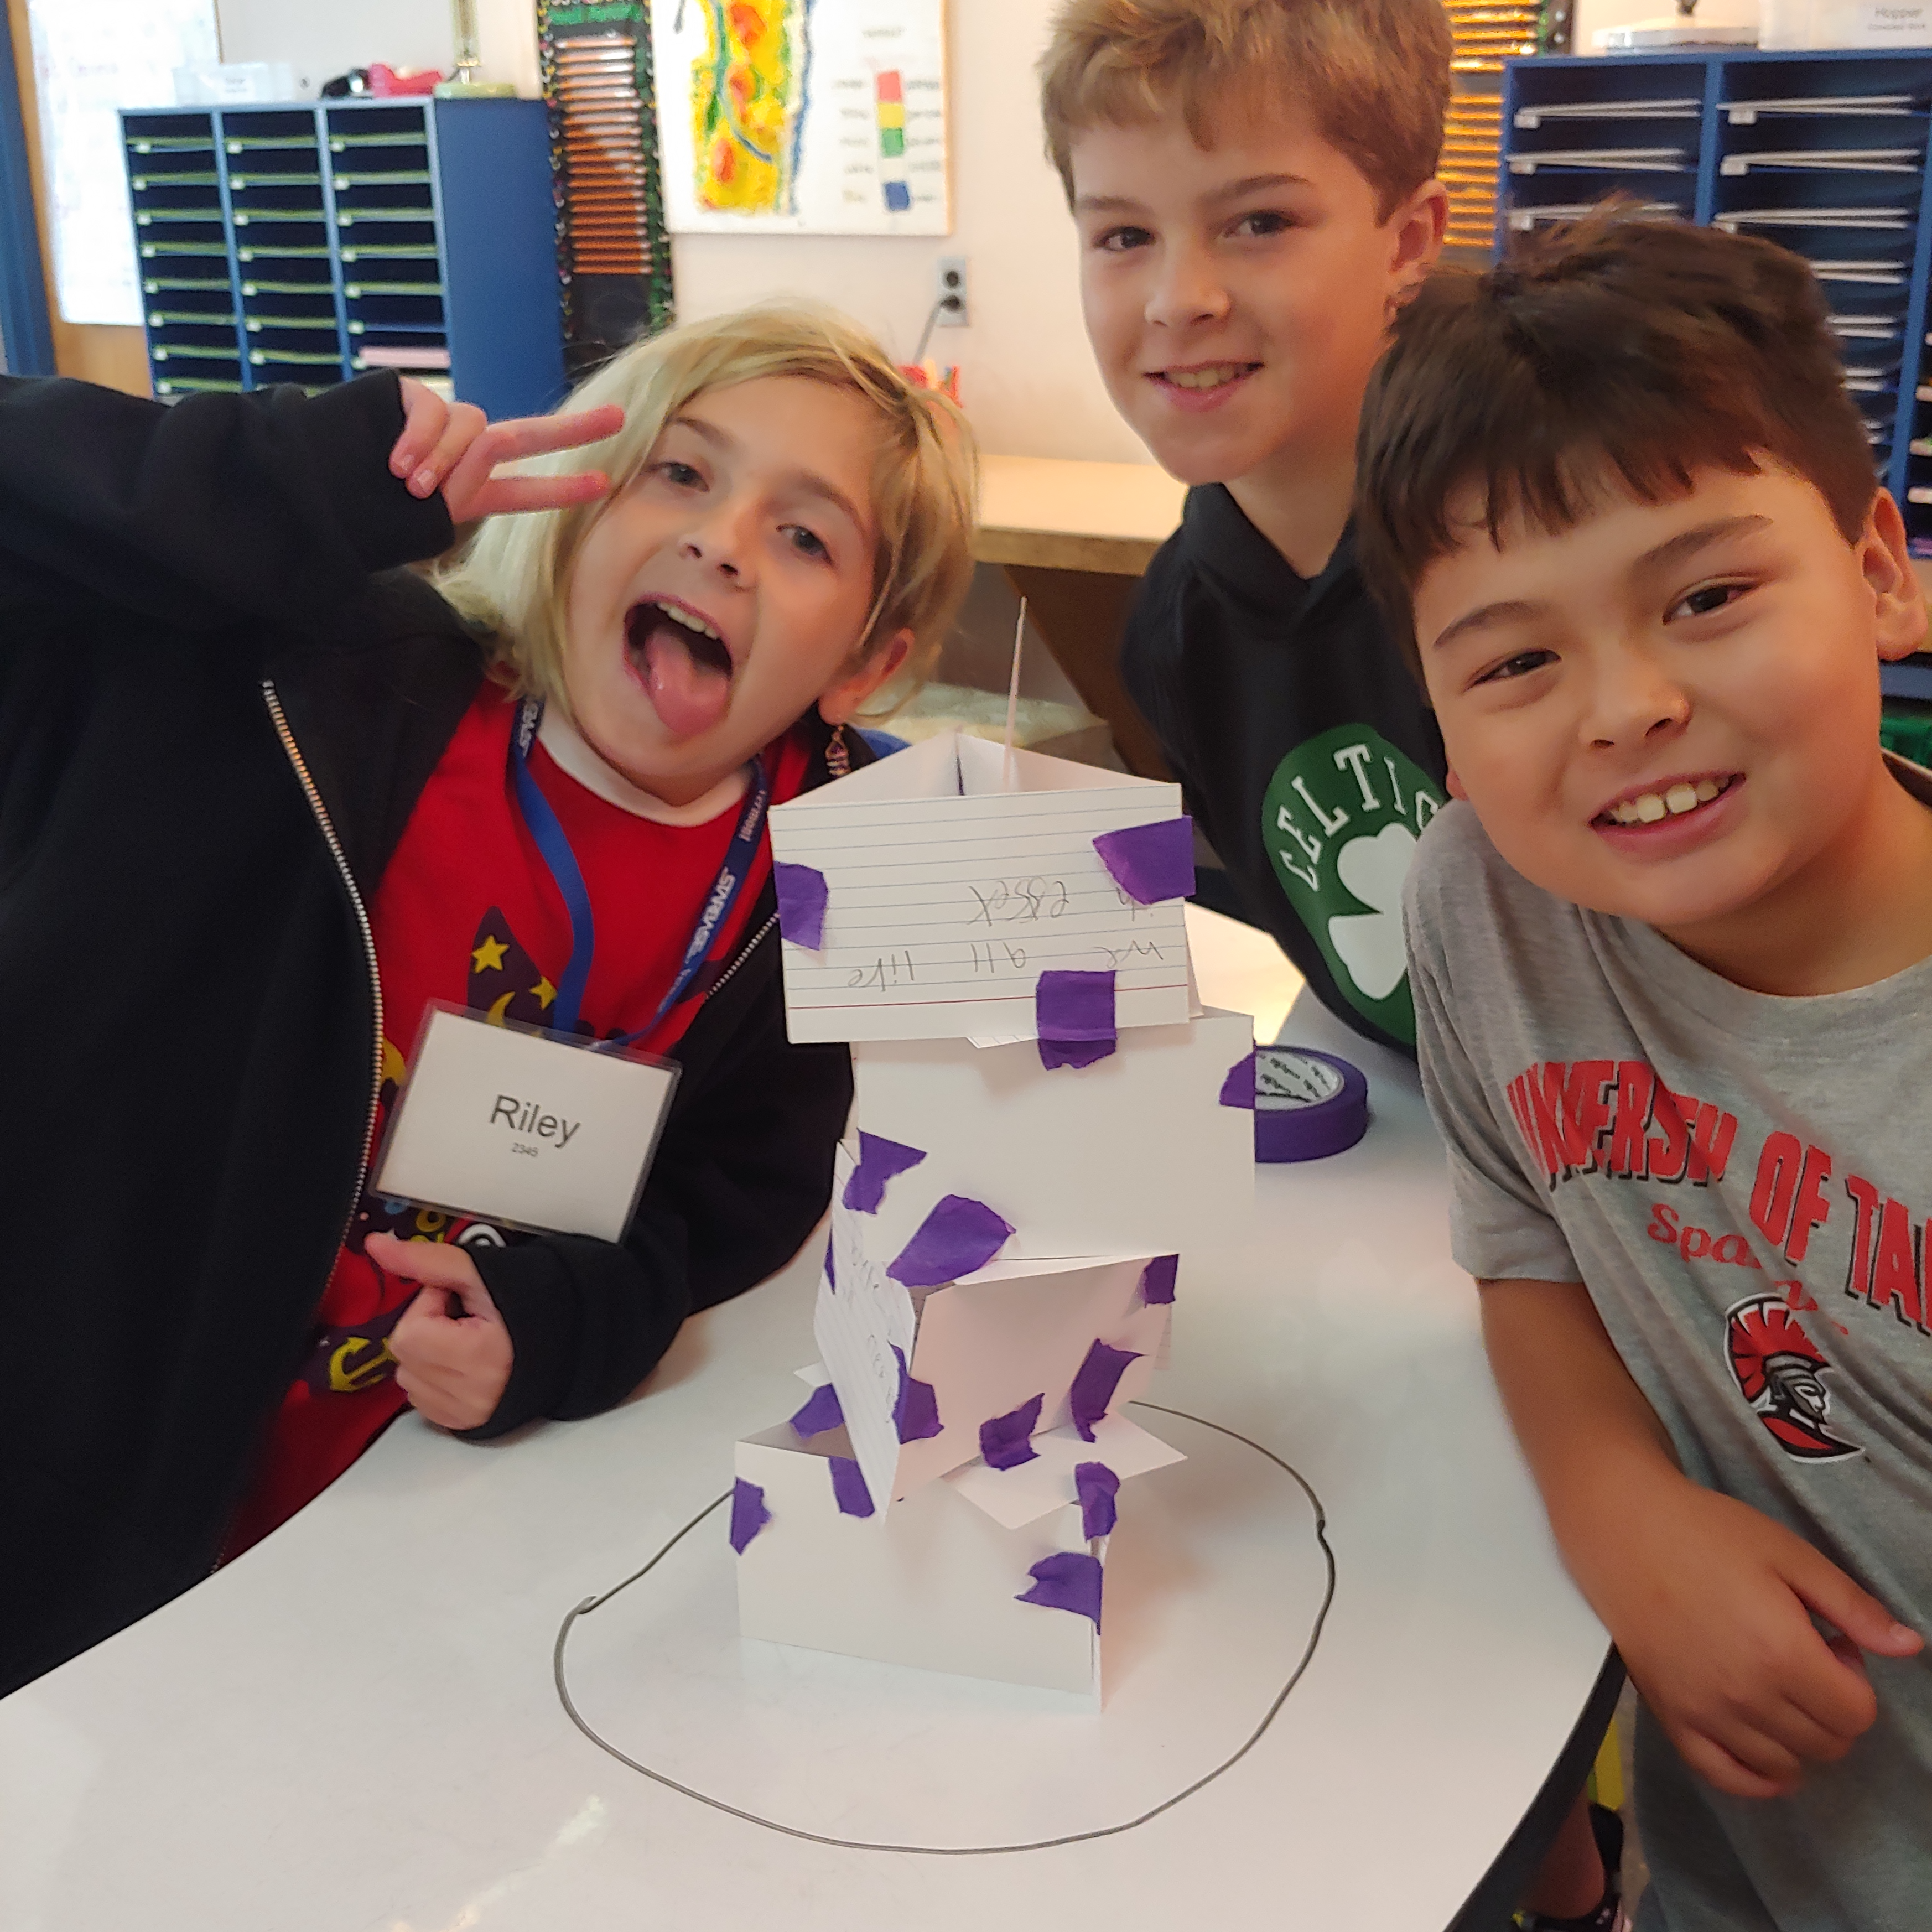 Building towers with index cards of things students have in common. 